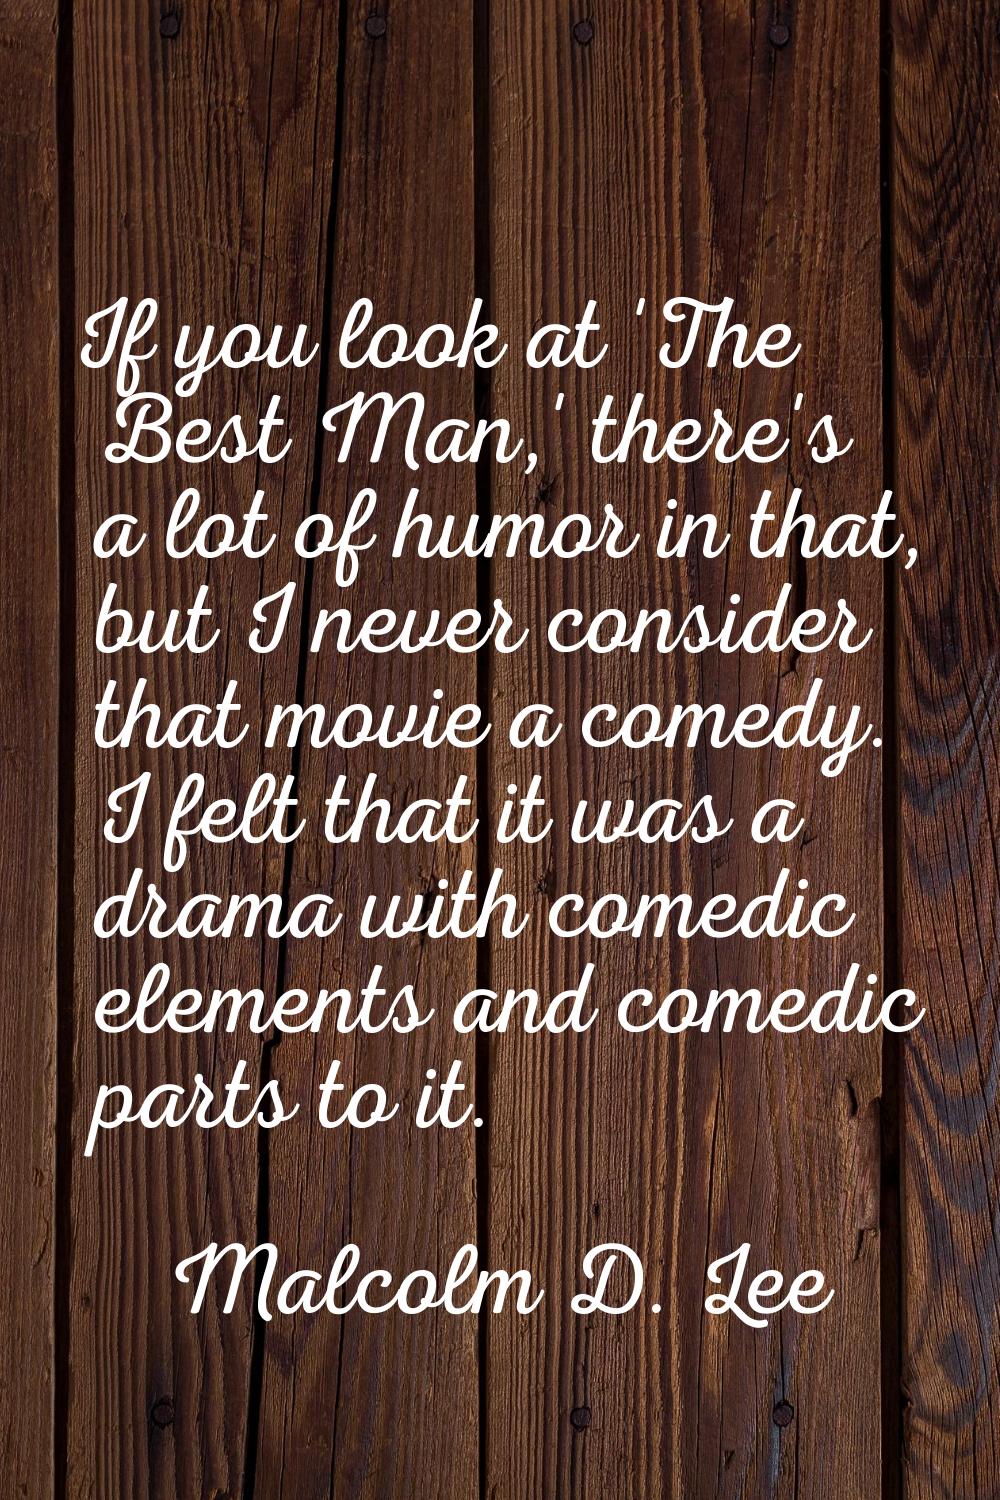 If you look at 'The Best Man,' there's a lot of humor in that, but I never consider that movie a co